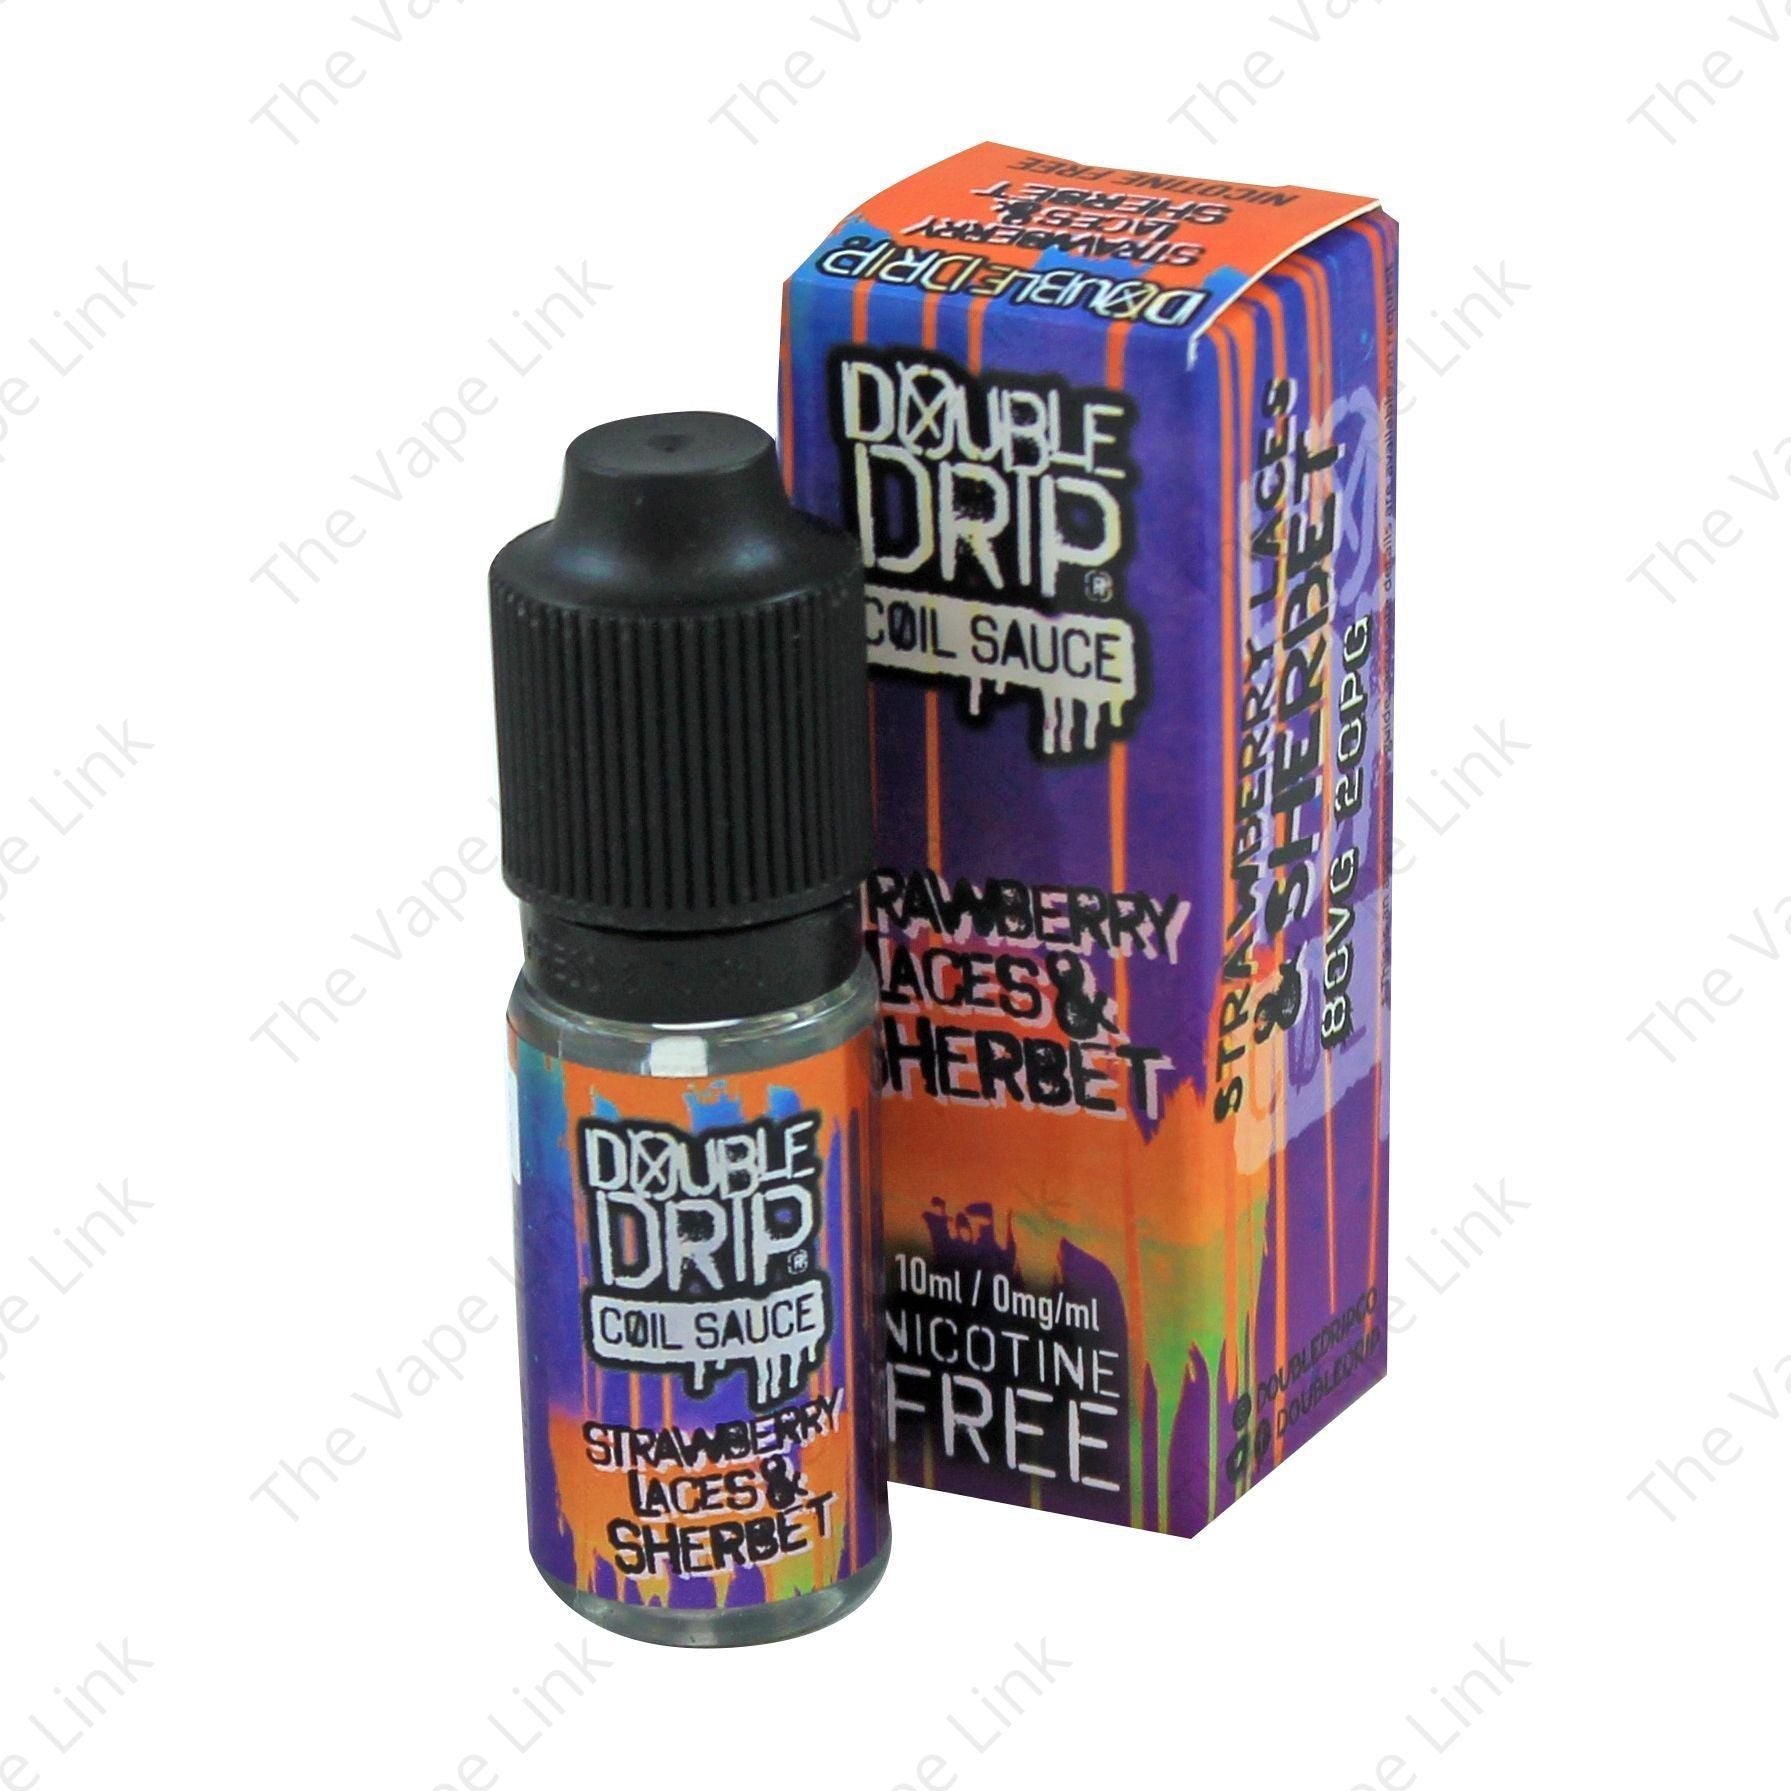 strawberry-laces-sherbet-e-liquid-by-double-drip-10ml sold by The Vape Link